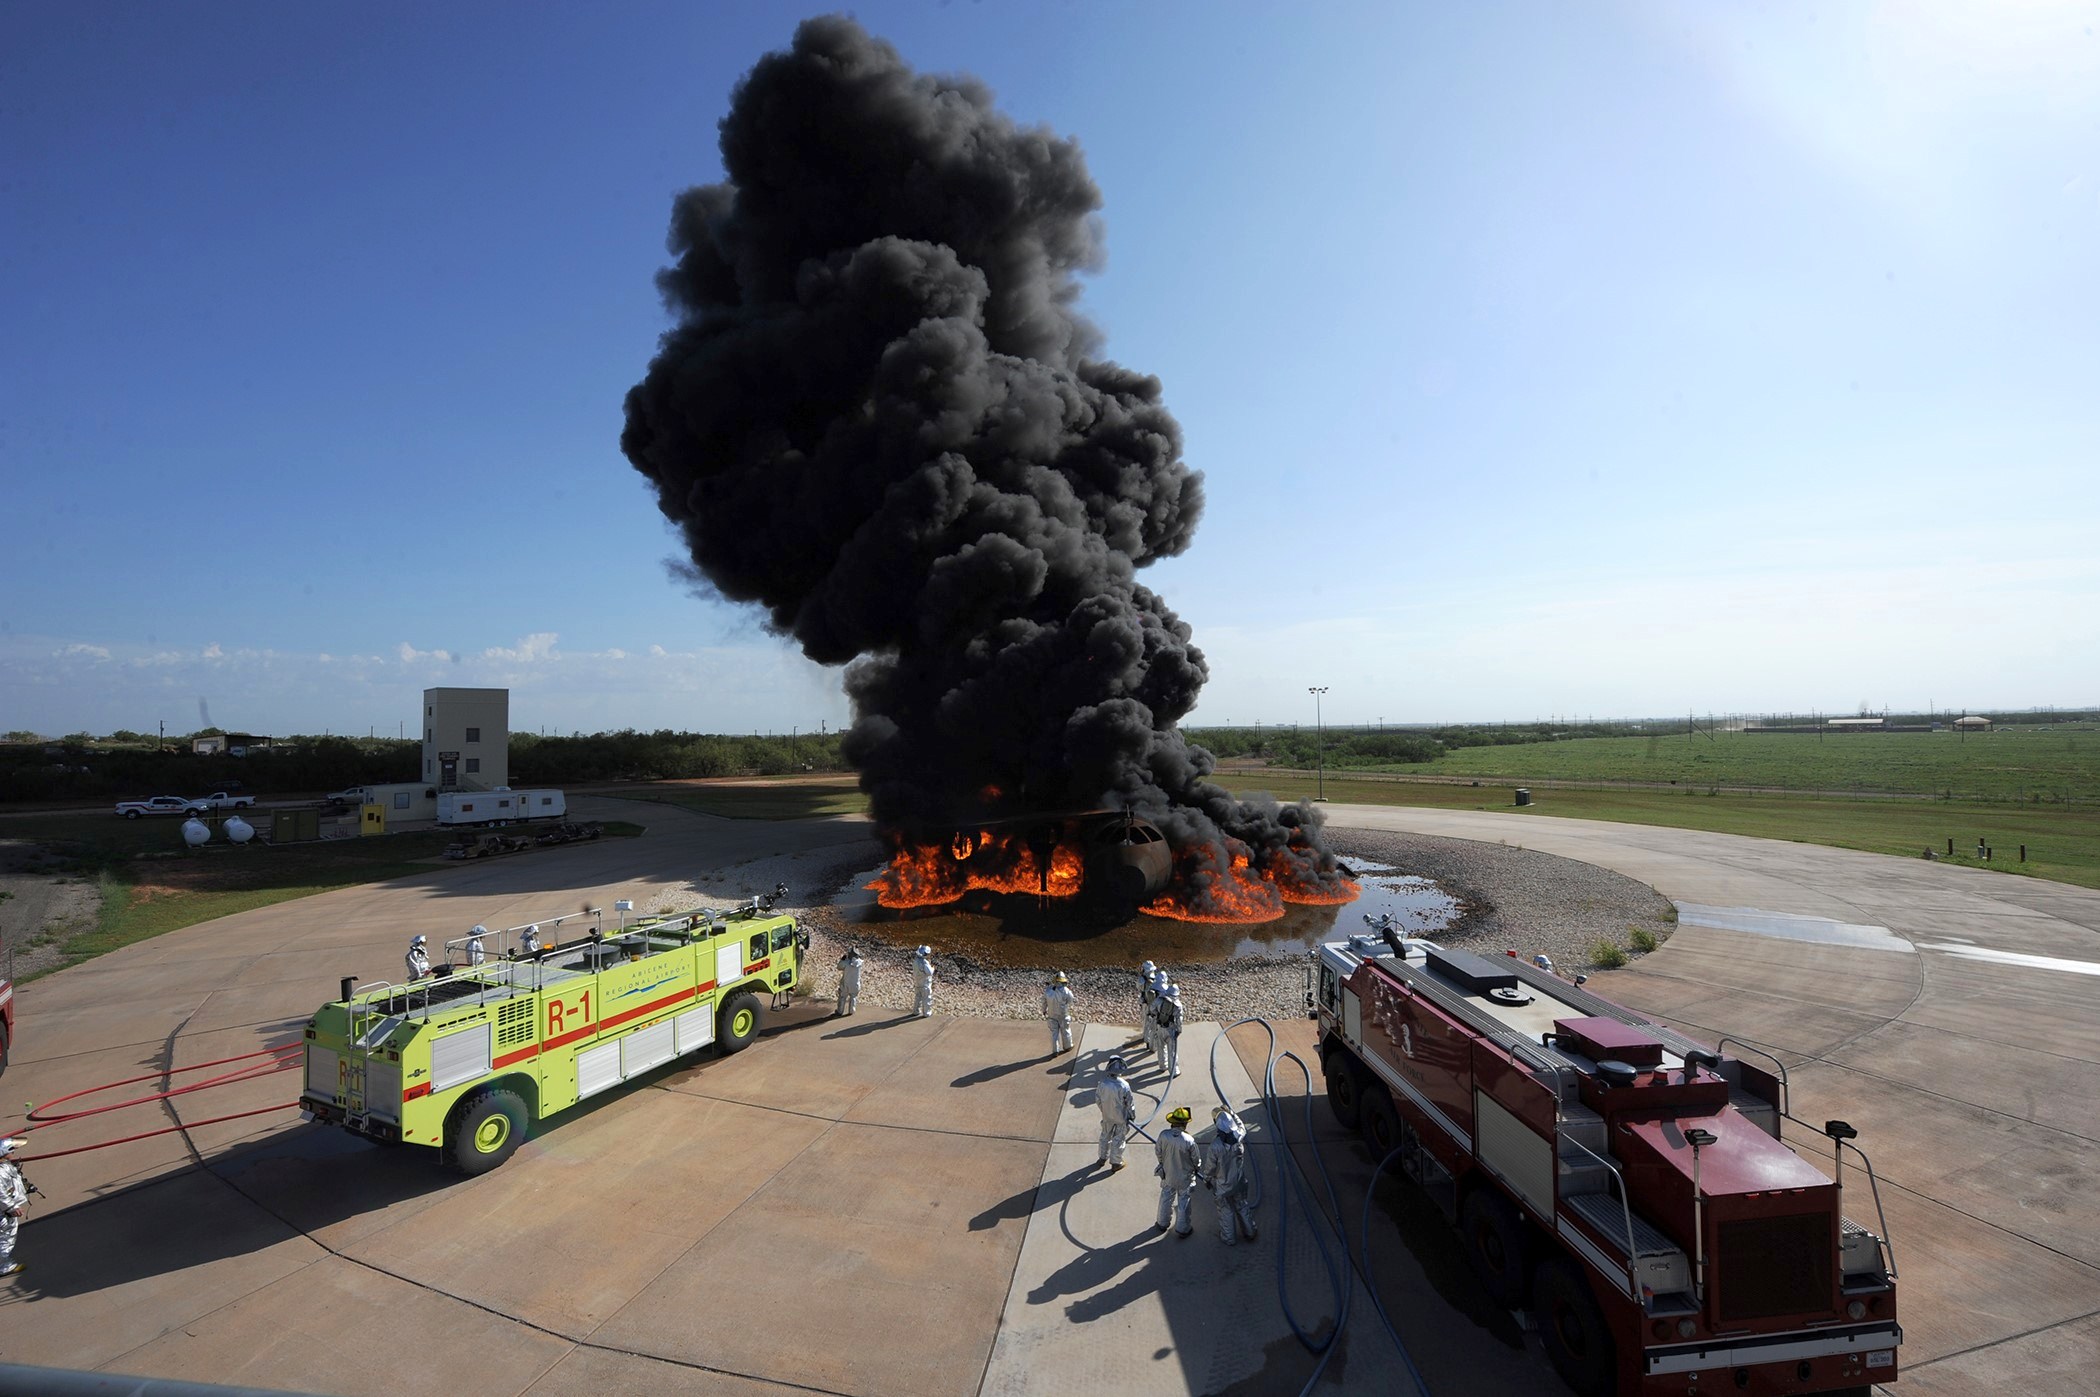 Firefighters putting out a fire at an aircraft firefighter training site